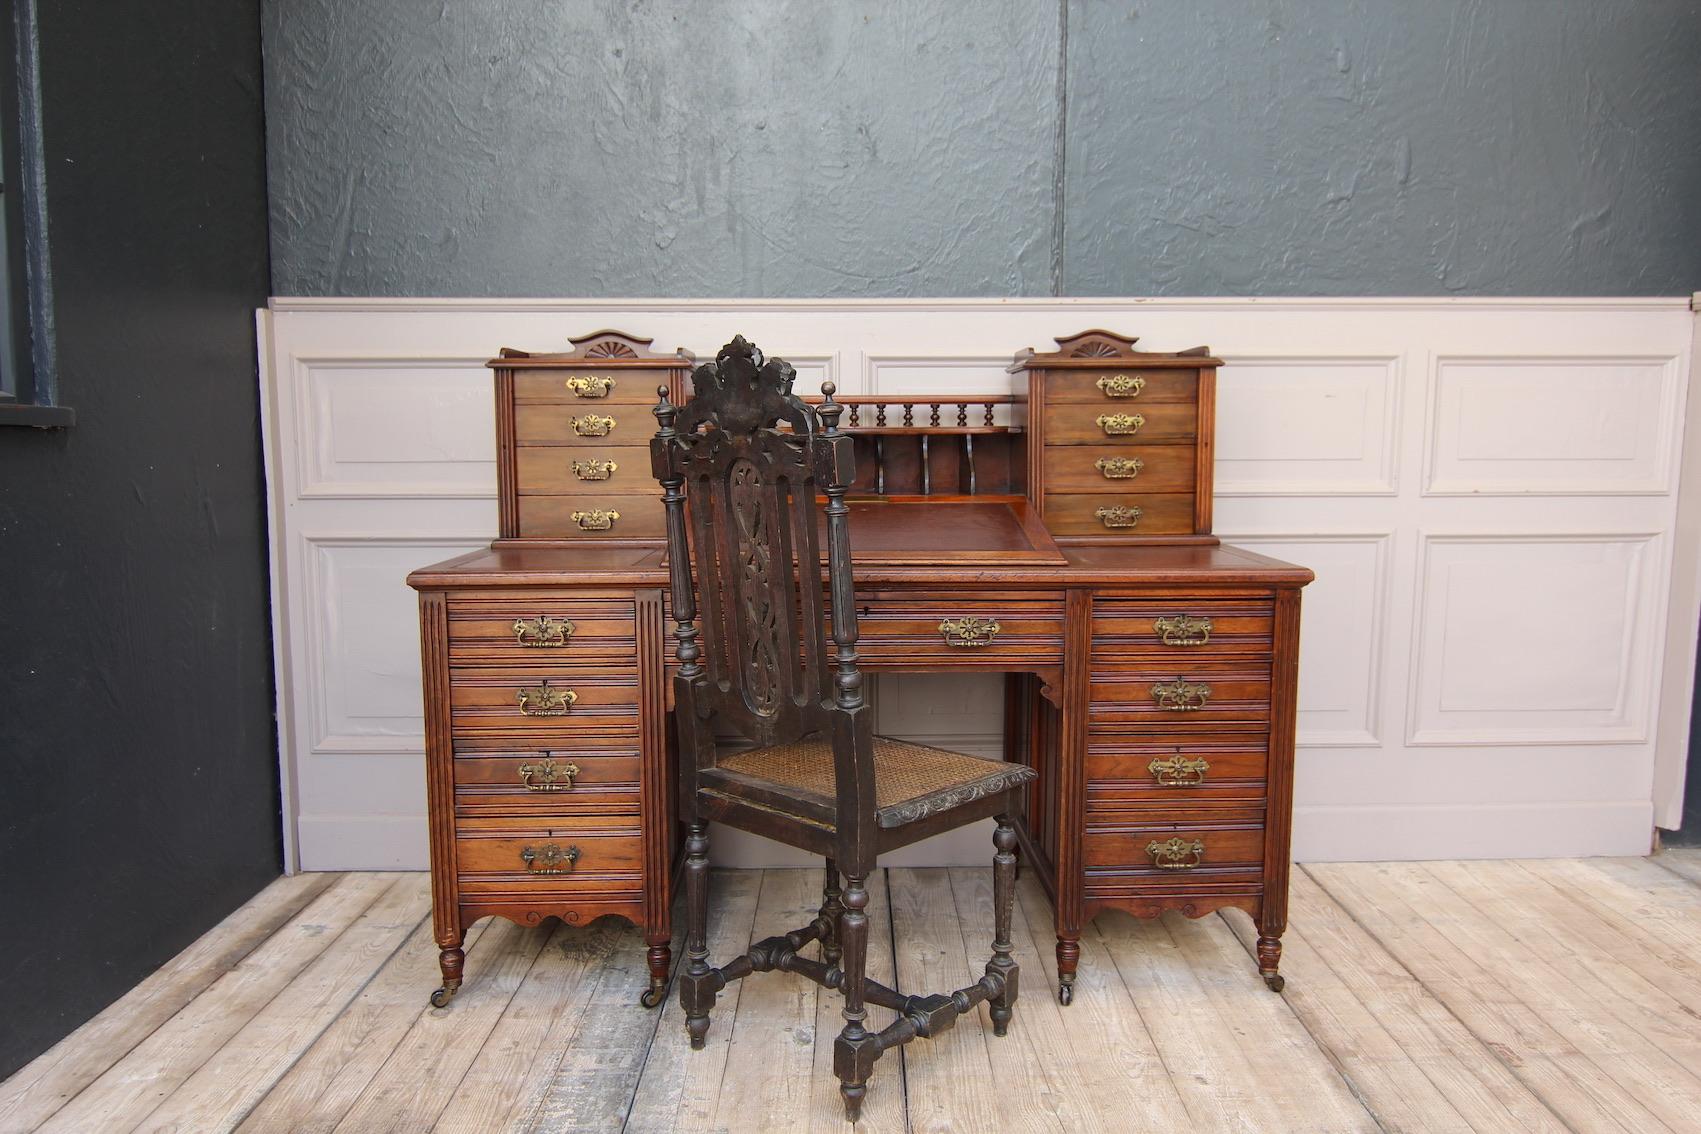 A late 19th century English writing desk. Made from solid walnut.

High-quality desk standing on eight swivel castors with a total of 16 lockable drawers and a desk flap. The small drawers of the attachment can be closed with the fluted strips